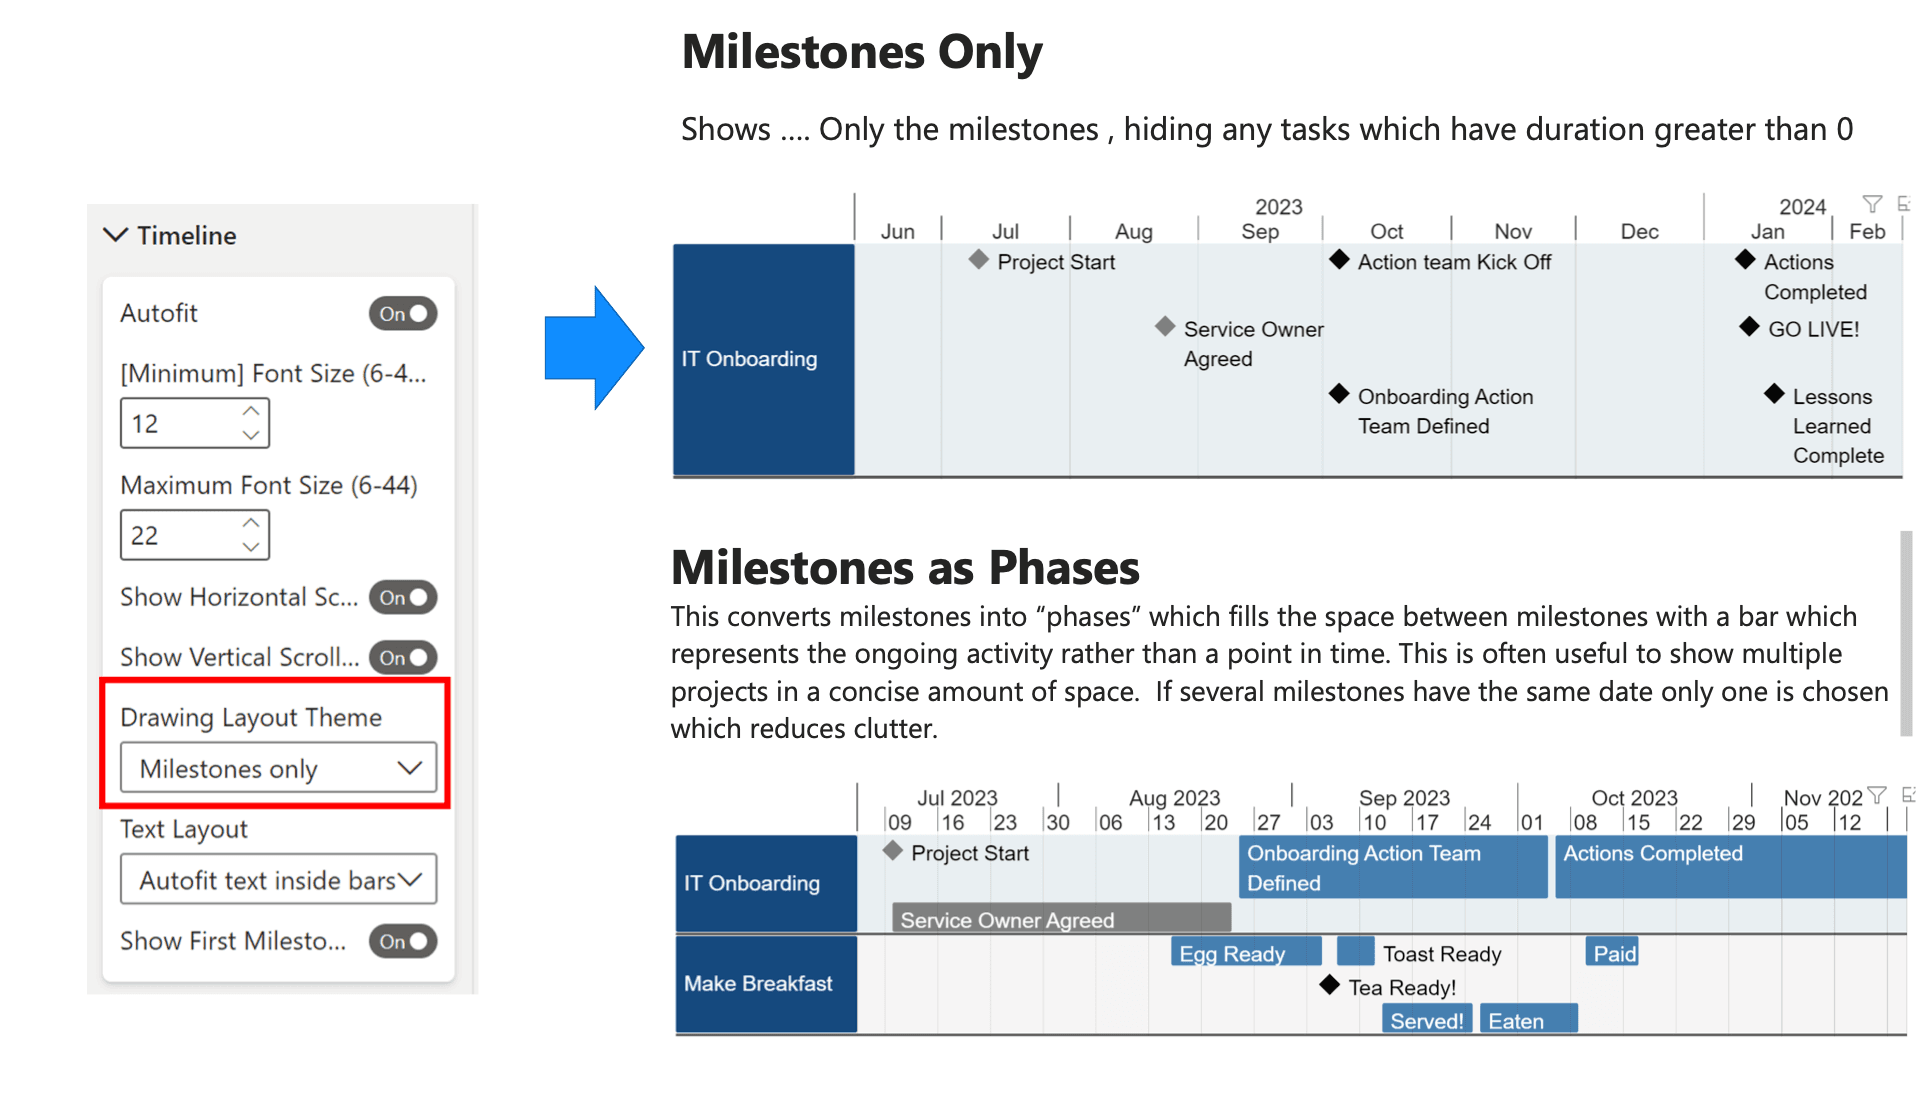 Show "Milestones Only" and "Milestones as Phases"